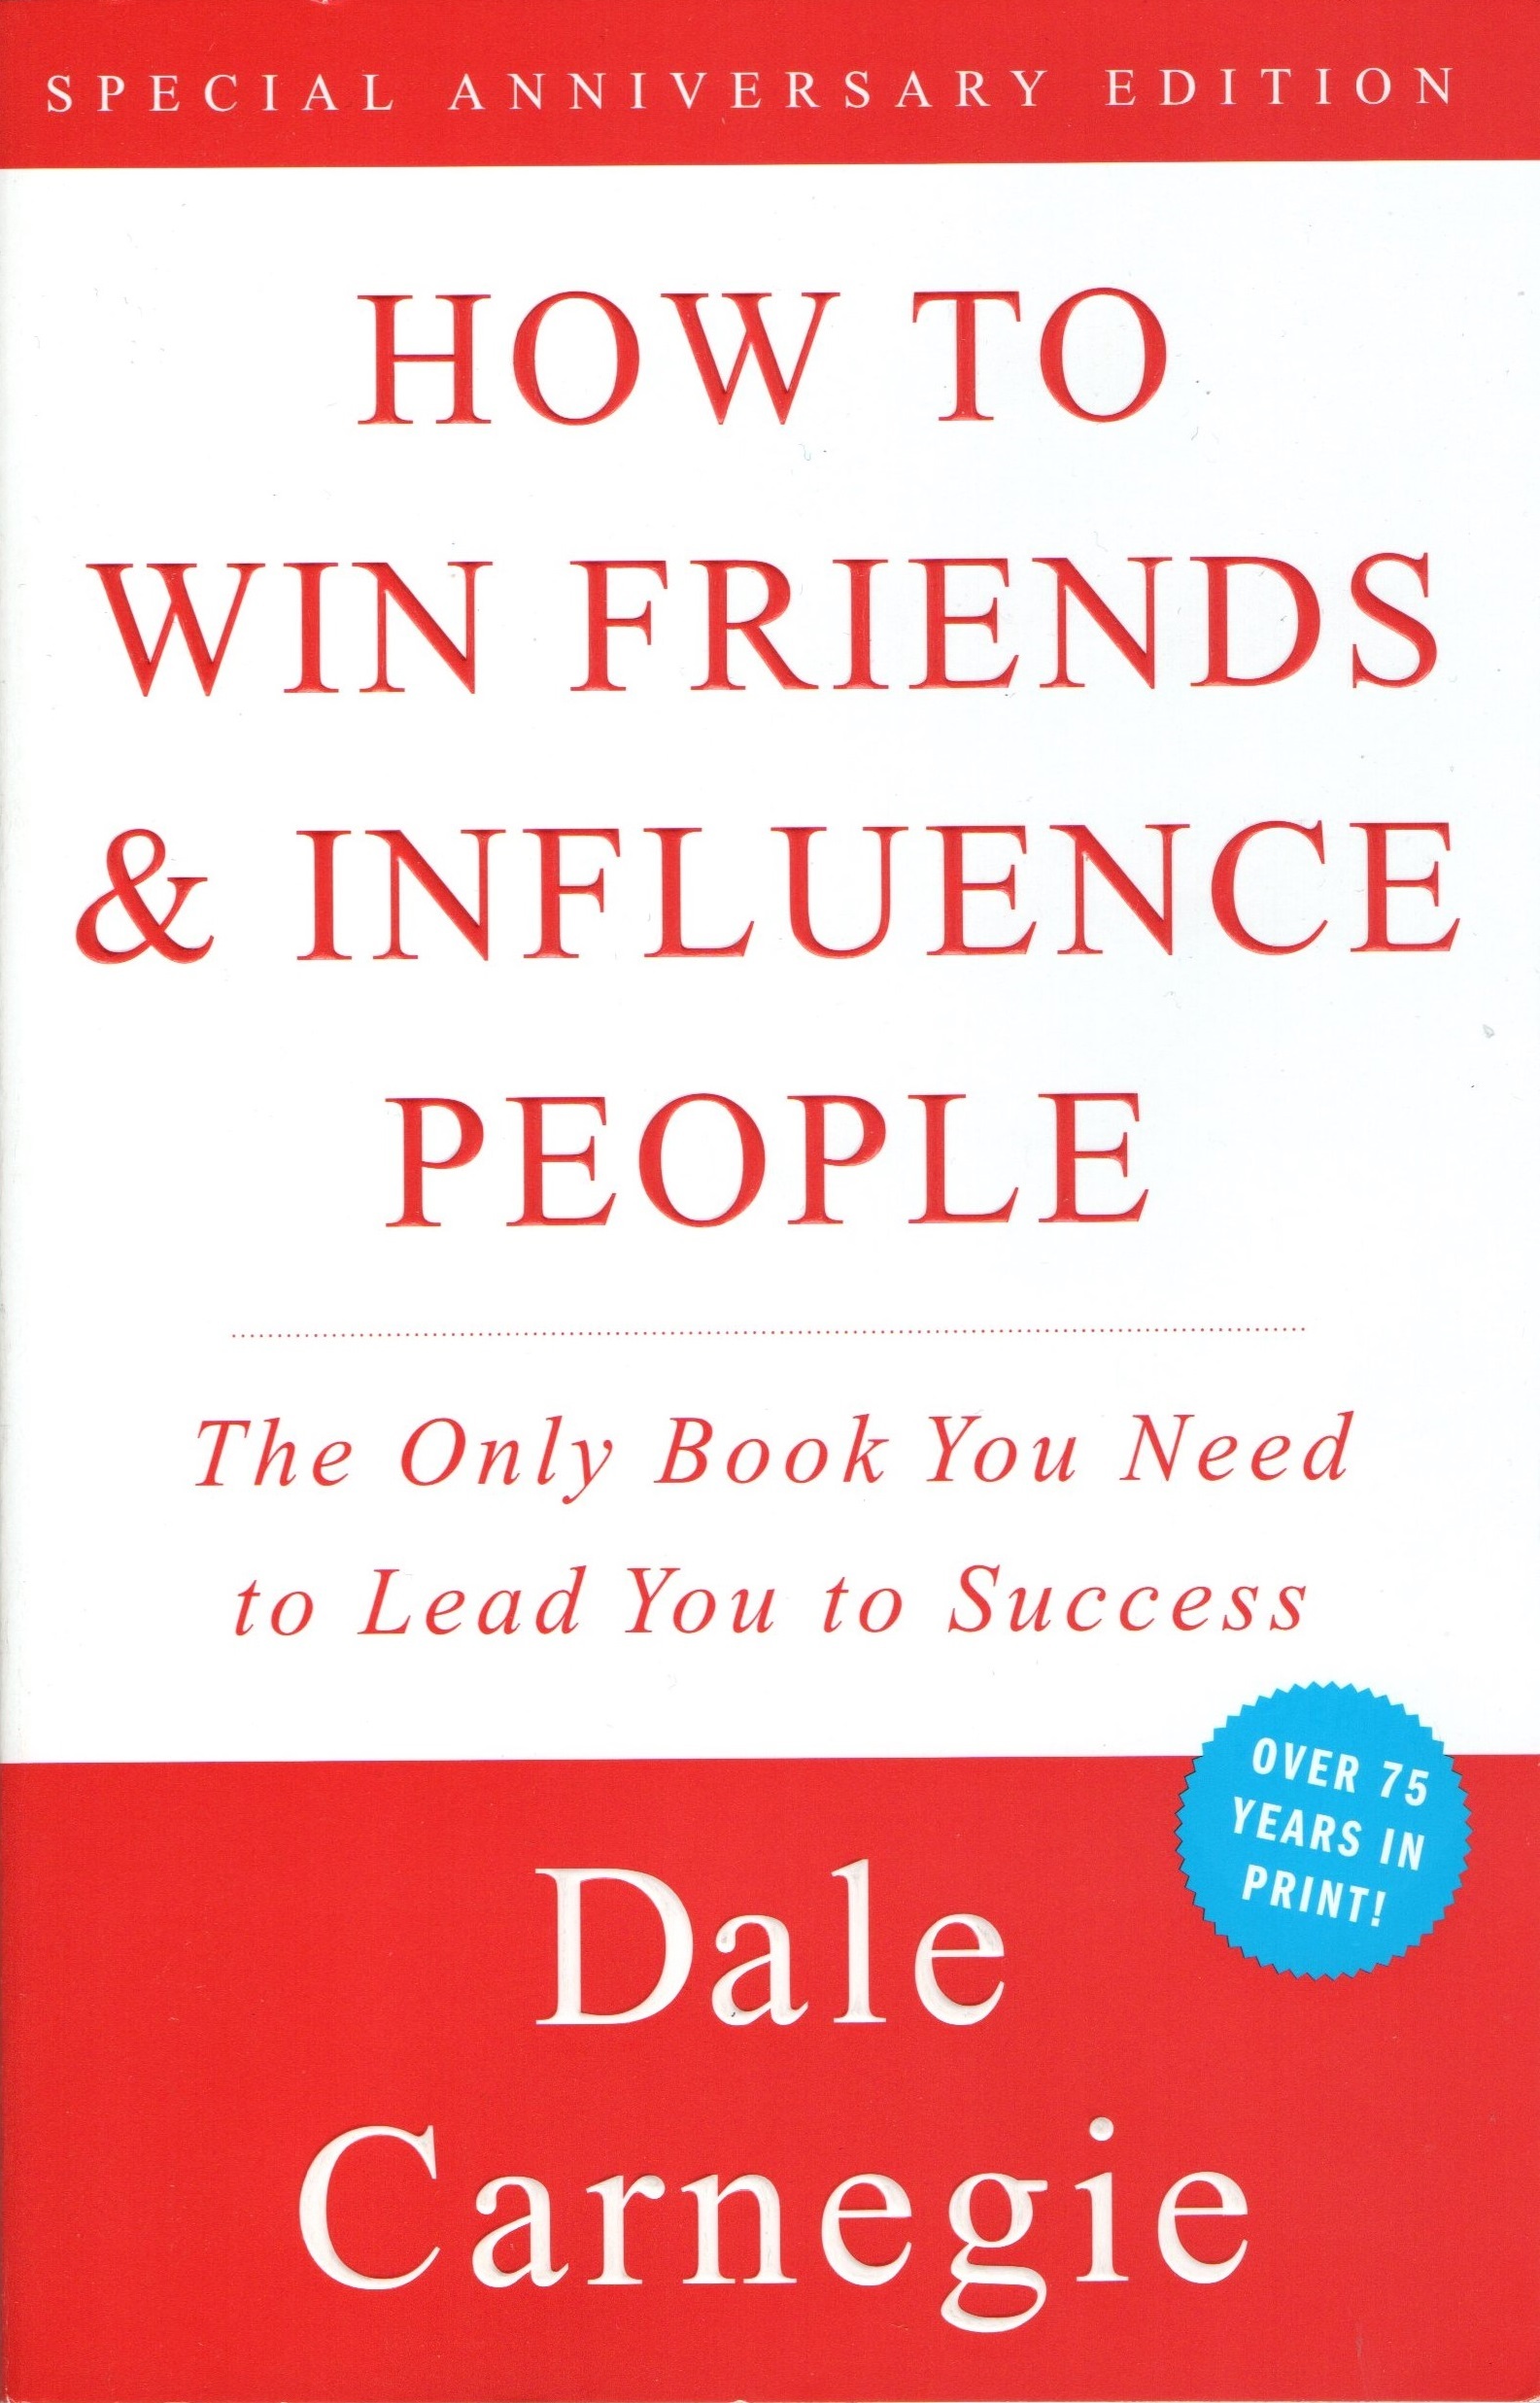 Dale Carnegie: How to win friends and influence people (Paperback, 1982, Pocket)